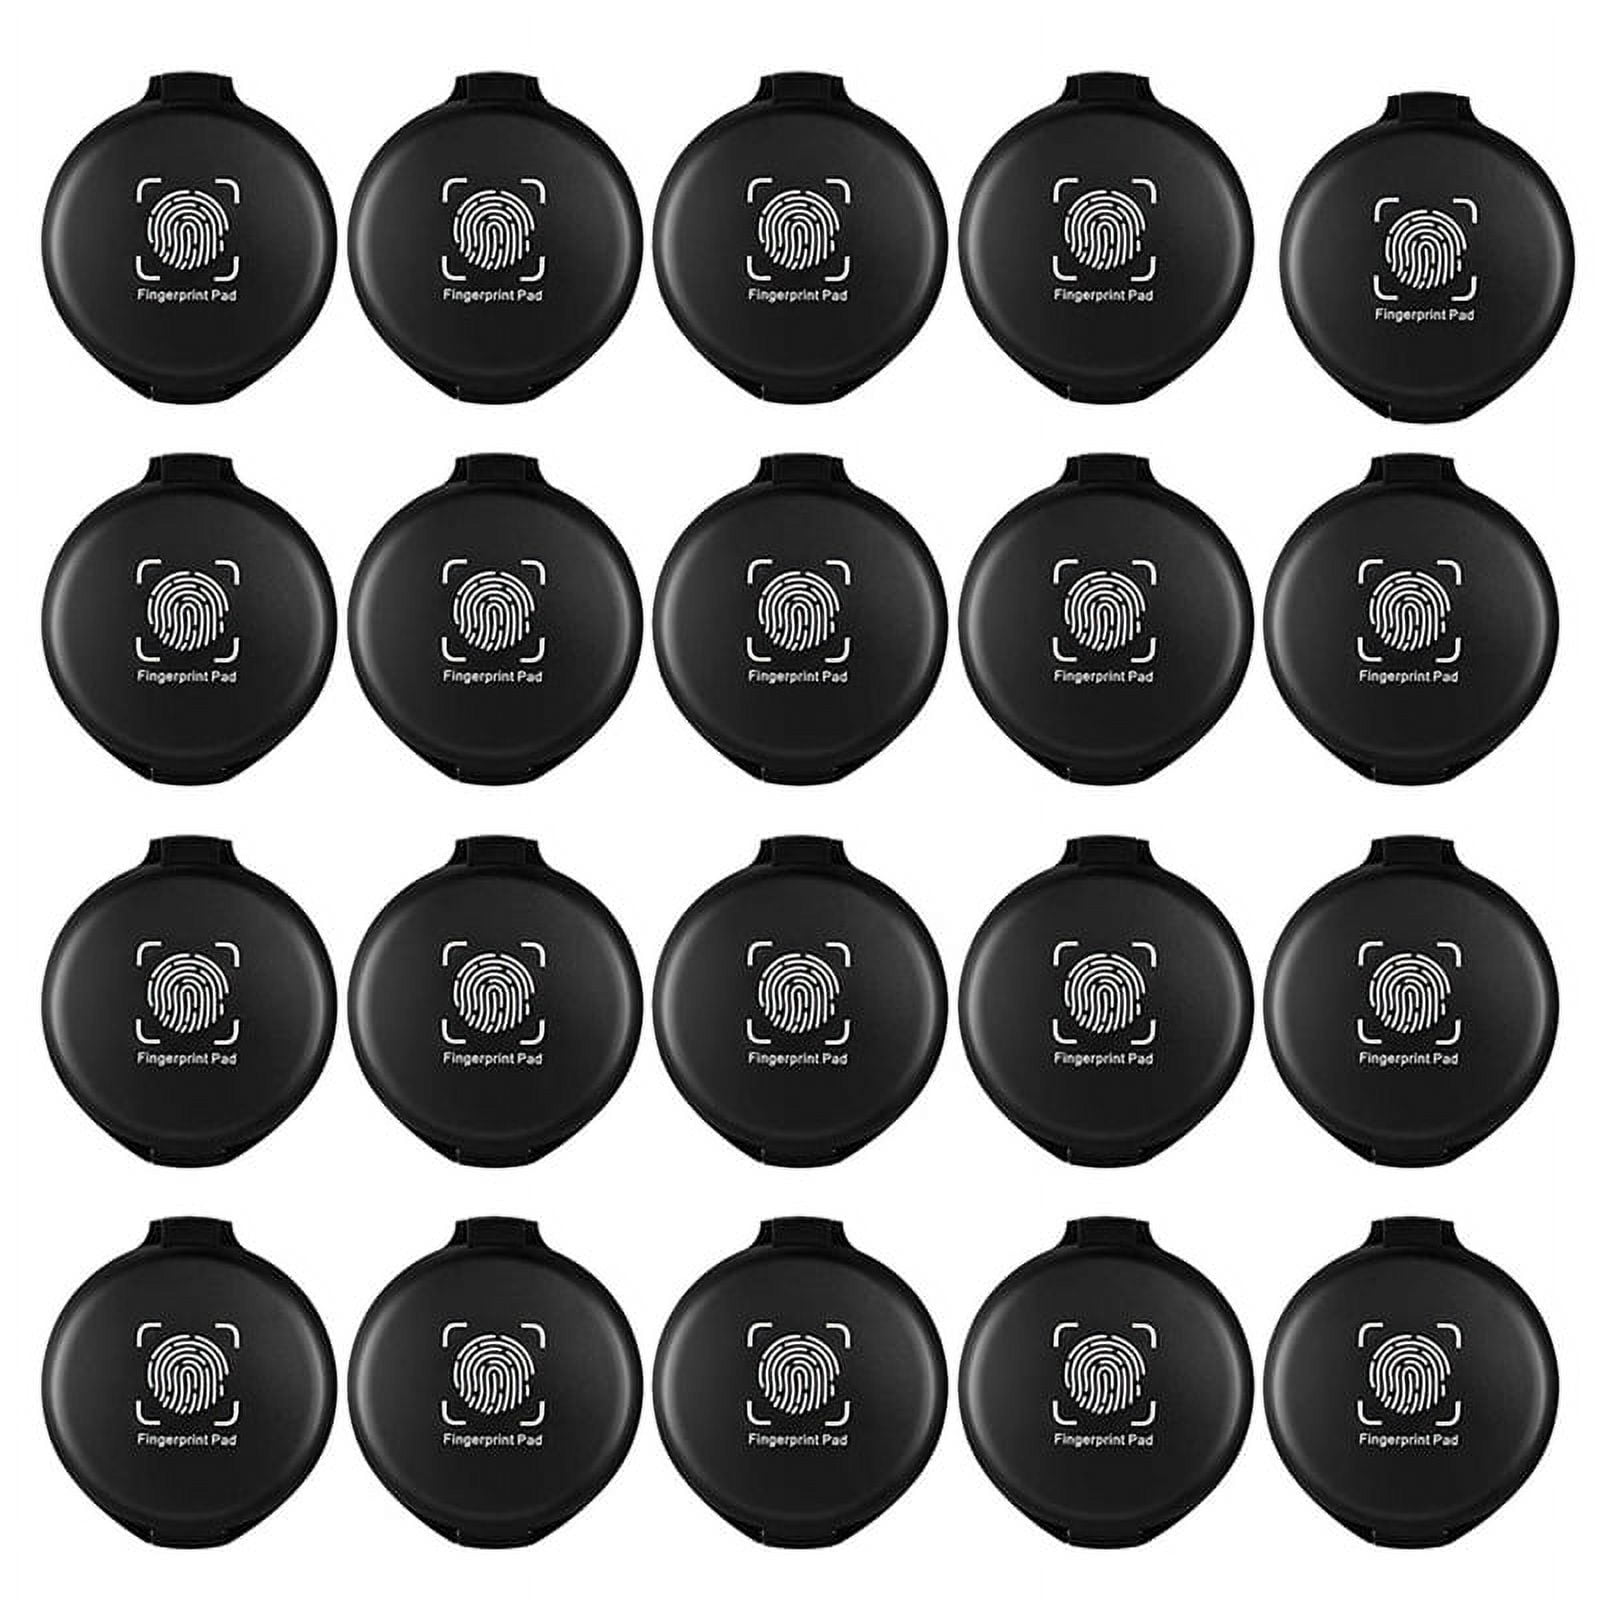  20PCS Fingerprint Thumbprint Ink Pad Mini Black Stamp Ink Pads  for Notary Supplies Identification Security ID Fingerprint Cards Law  Enforcement Fingerprint Kit Home Office Use : Office Products